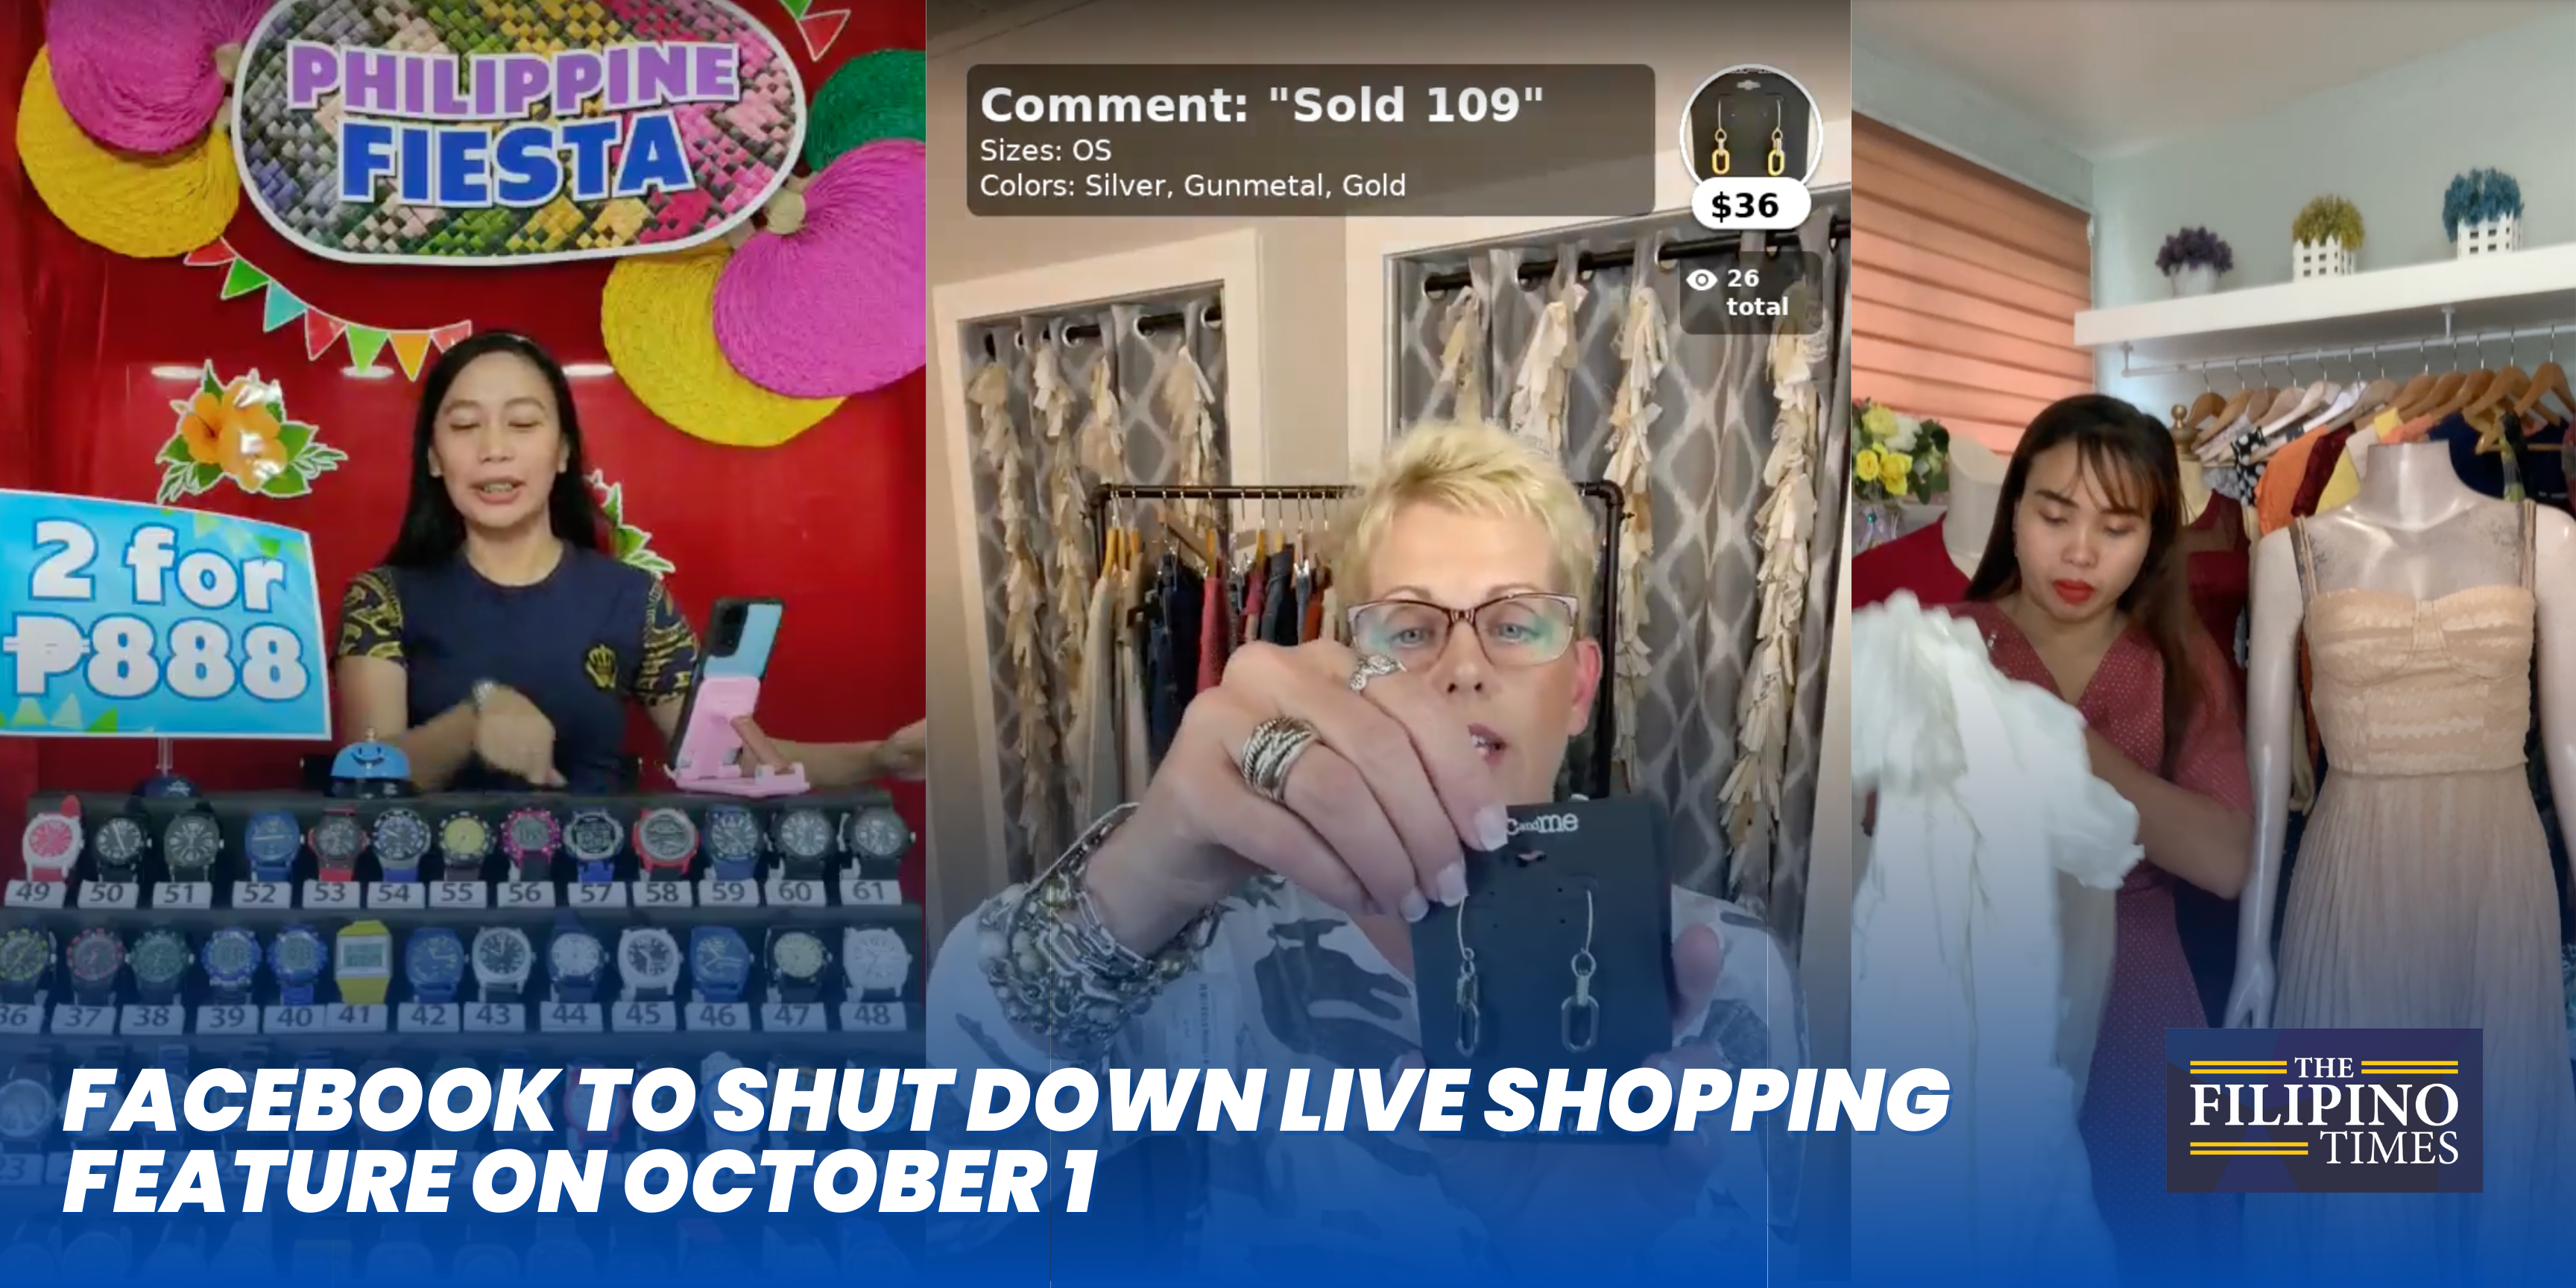 Facebook is shutting down its live shopping feature on October 1